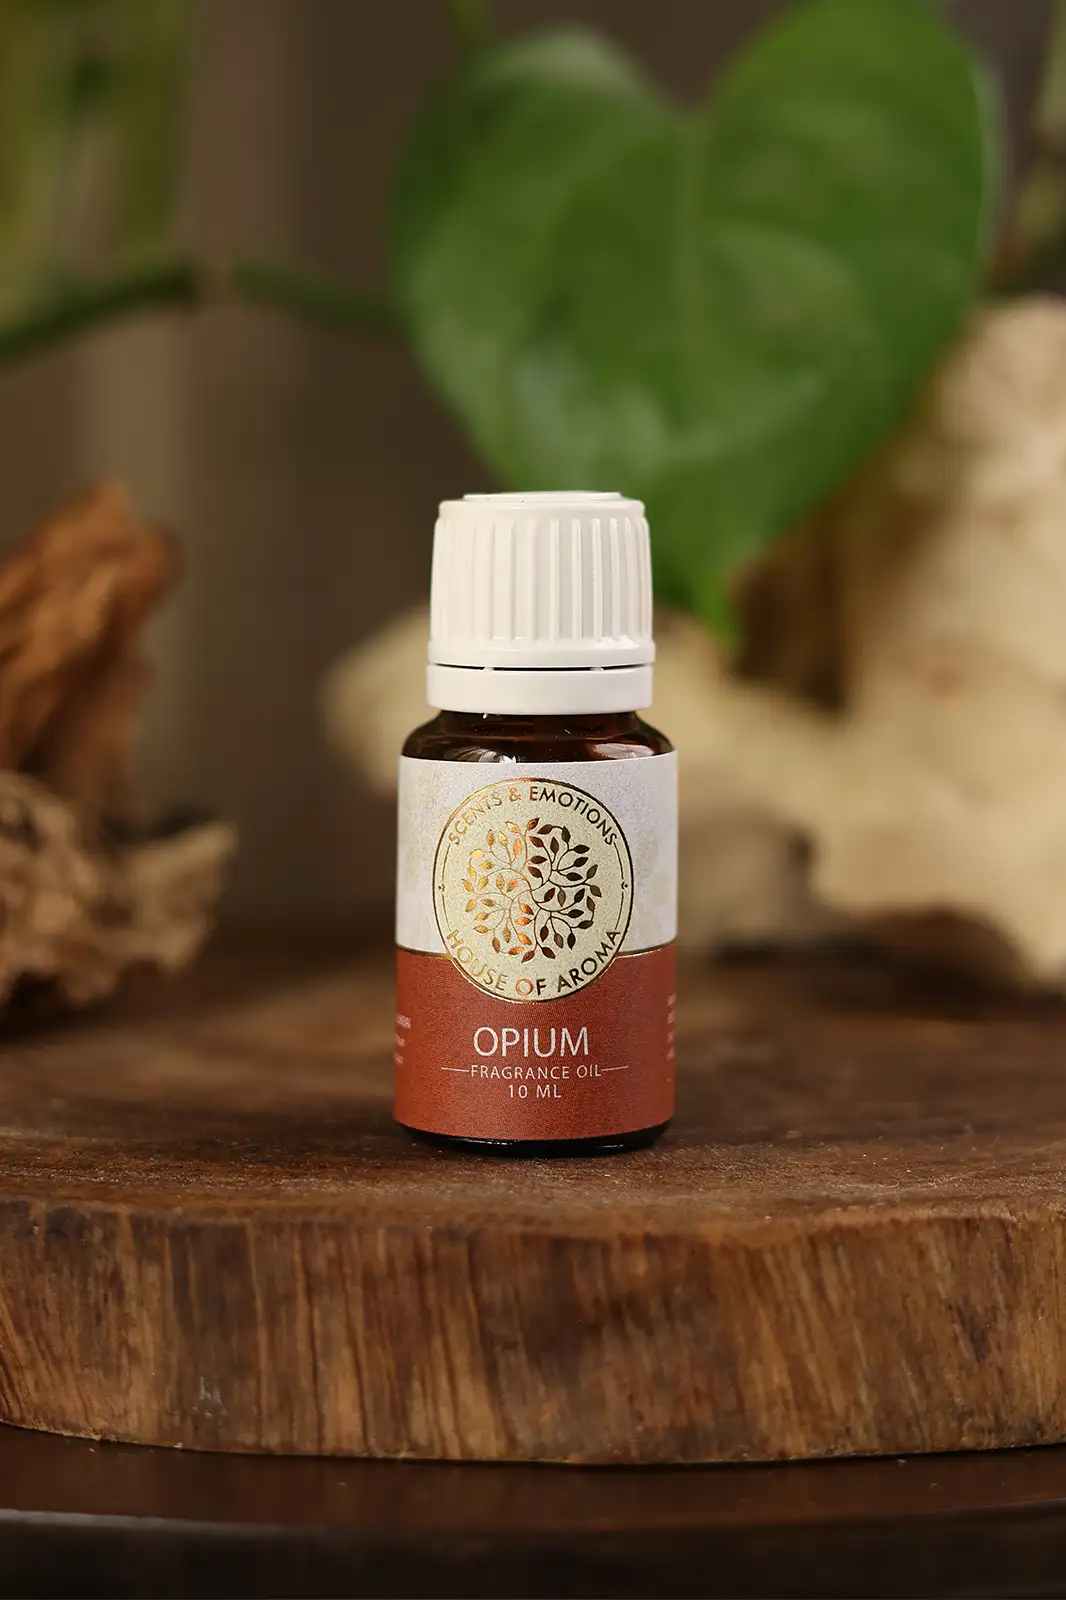 Fragrance Oil, Aroma oil, Synthetic oils, Fragrance oil for candles, oil for diffusers, Aromatic oil, Candle oil, Aromatherapy oil, oil manufacturers, House of Aroma, opium fragrance oil, oil-soluble fragrance, water-soluble fragrance oils, opium aroma oil, opium oil, black opium oil, black opium oil fragrance, black opium oil benefits